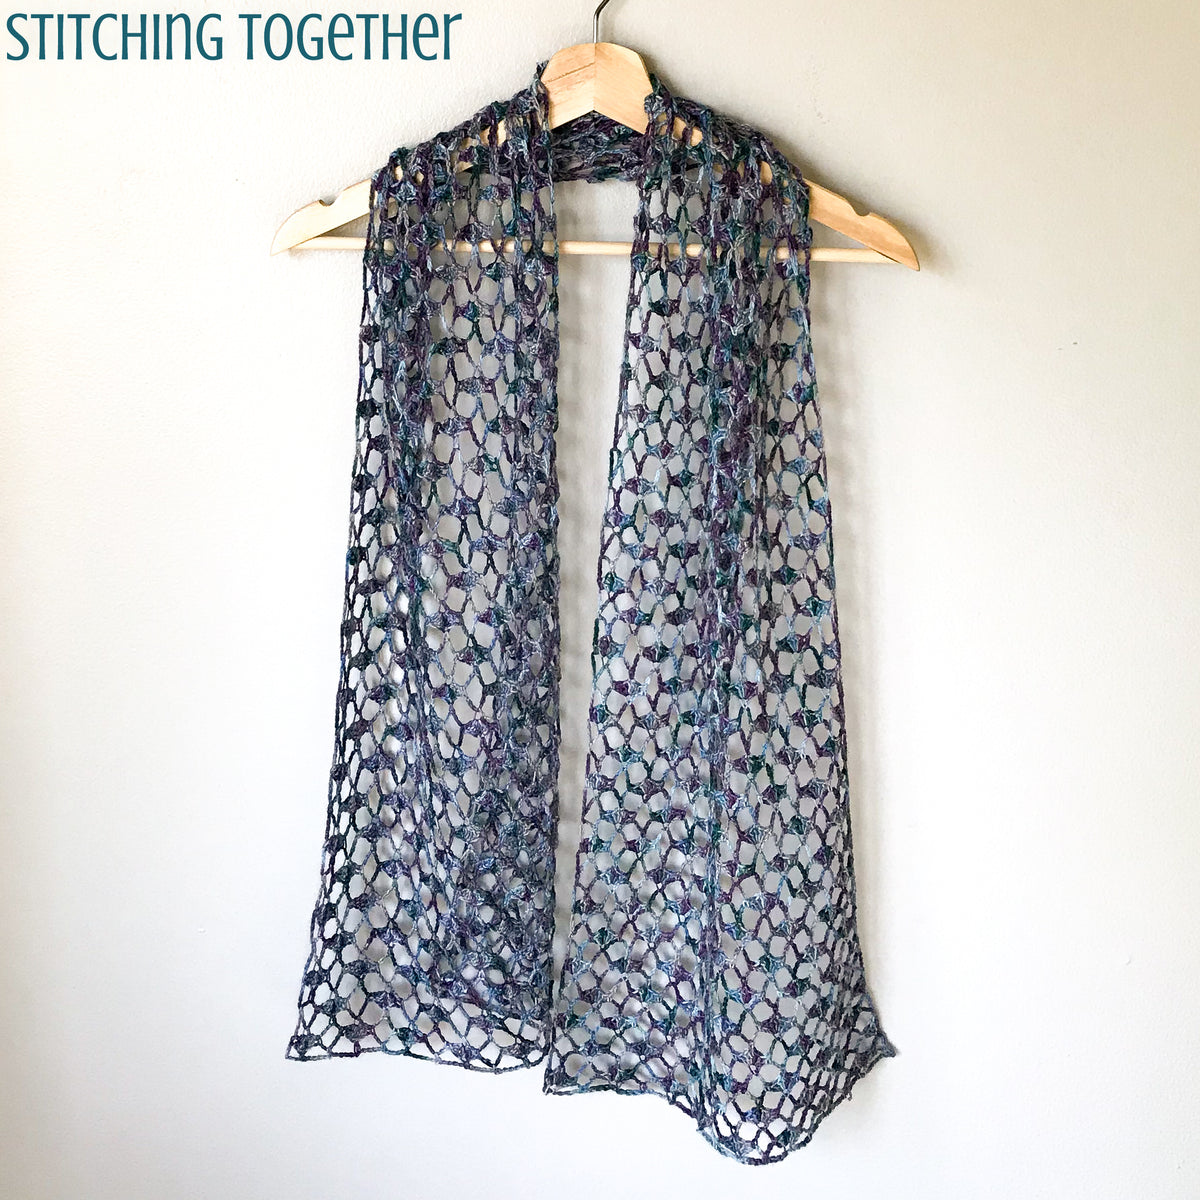 Crochet Lacy Scarf – Stitching Together